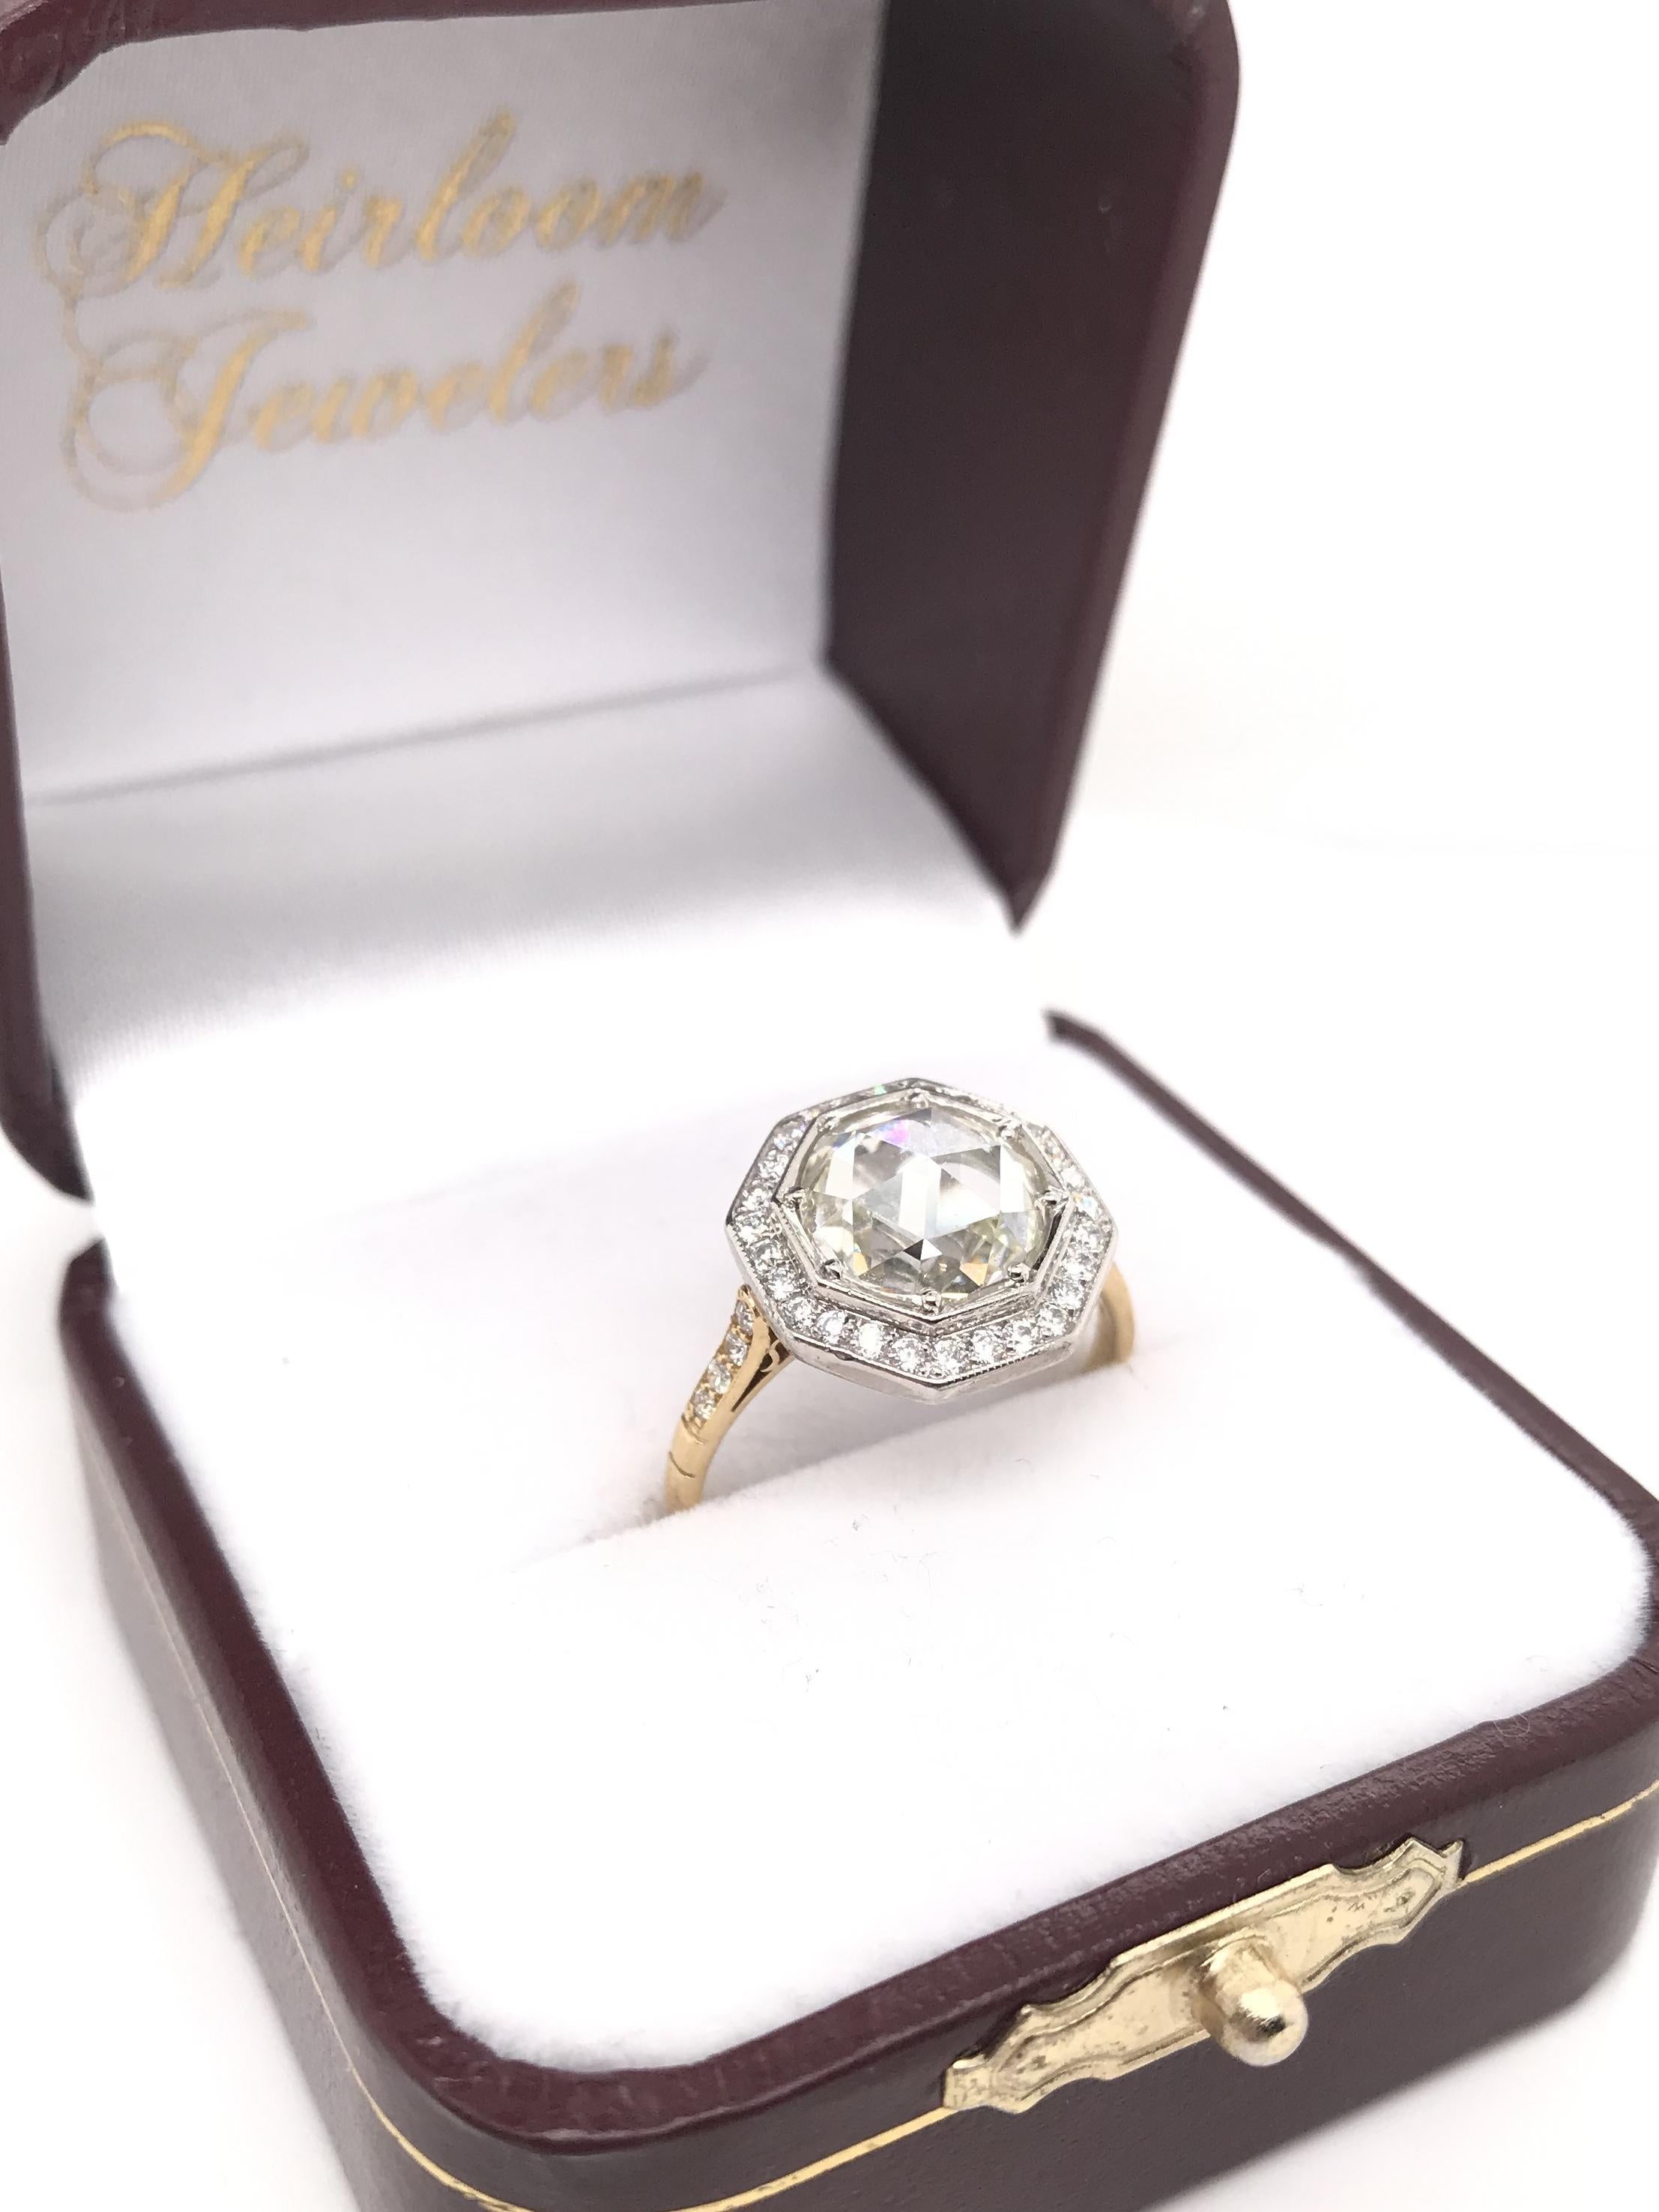 Contemporary Antique Inspired 2.63 Carat Rose Cut Diamond Ring For Sale 12